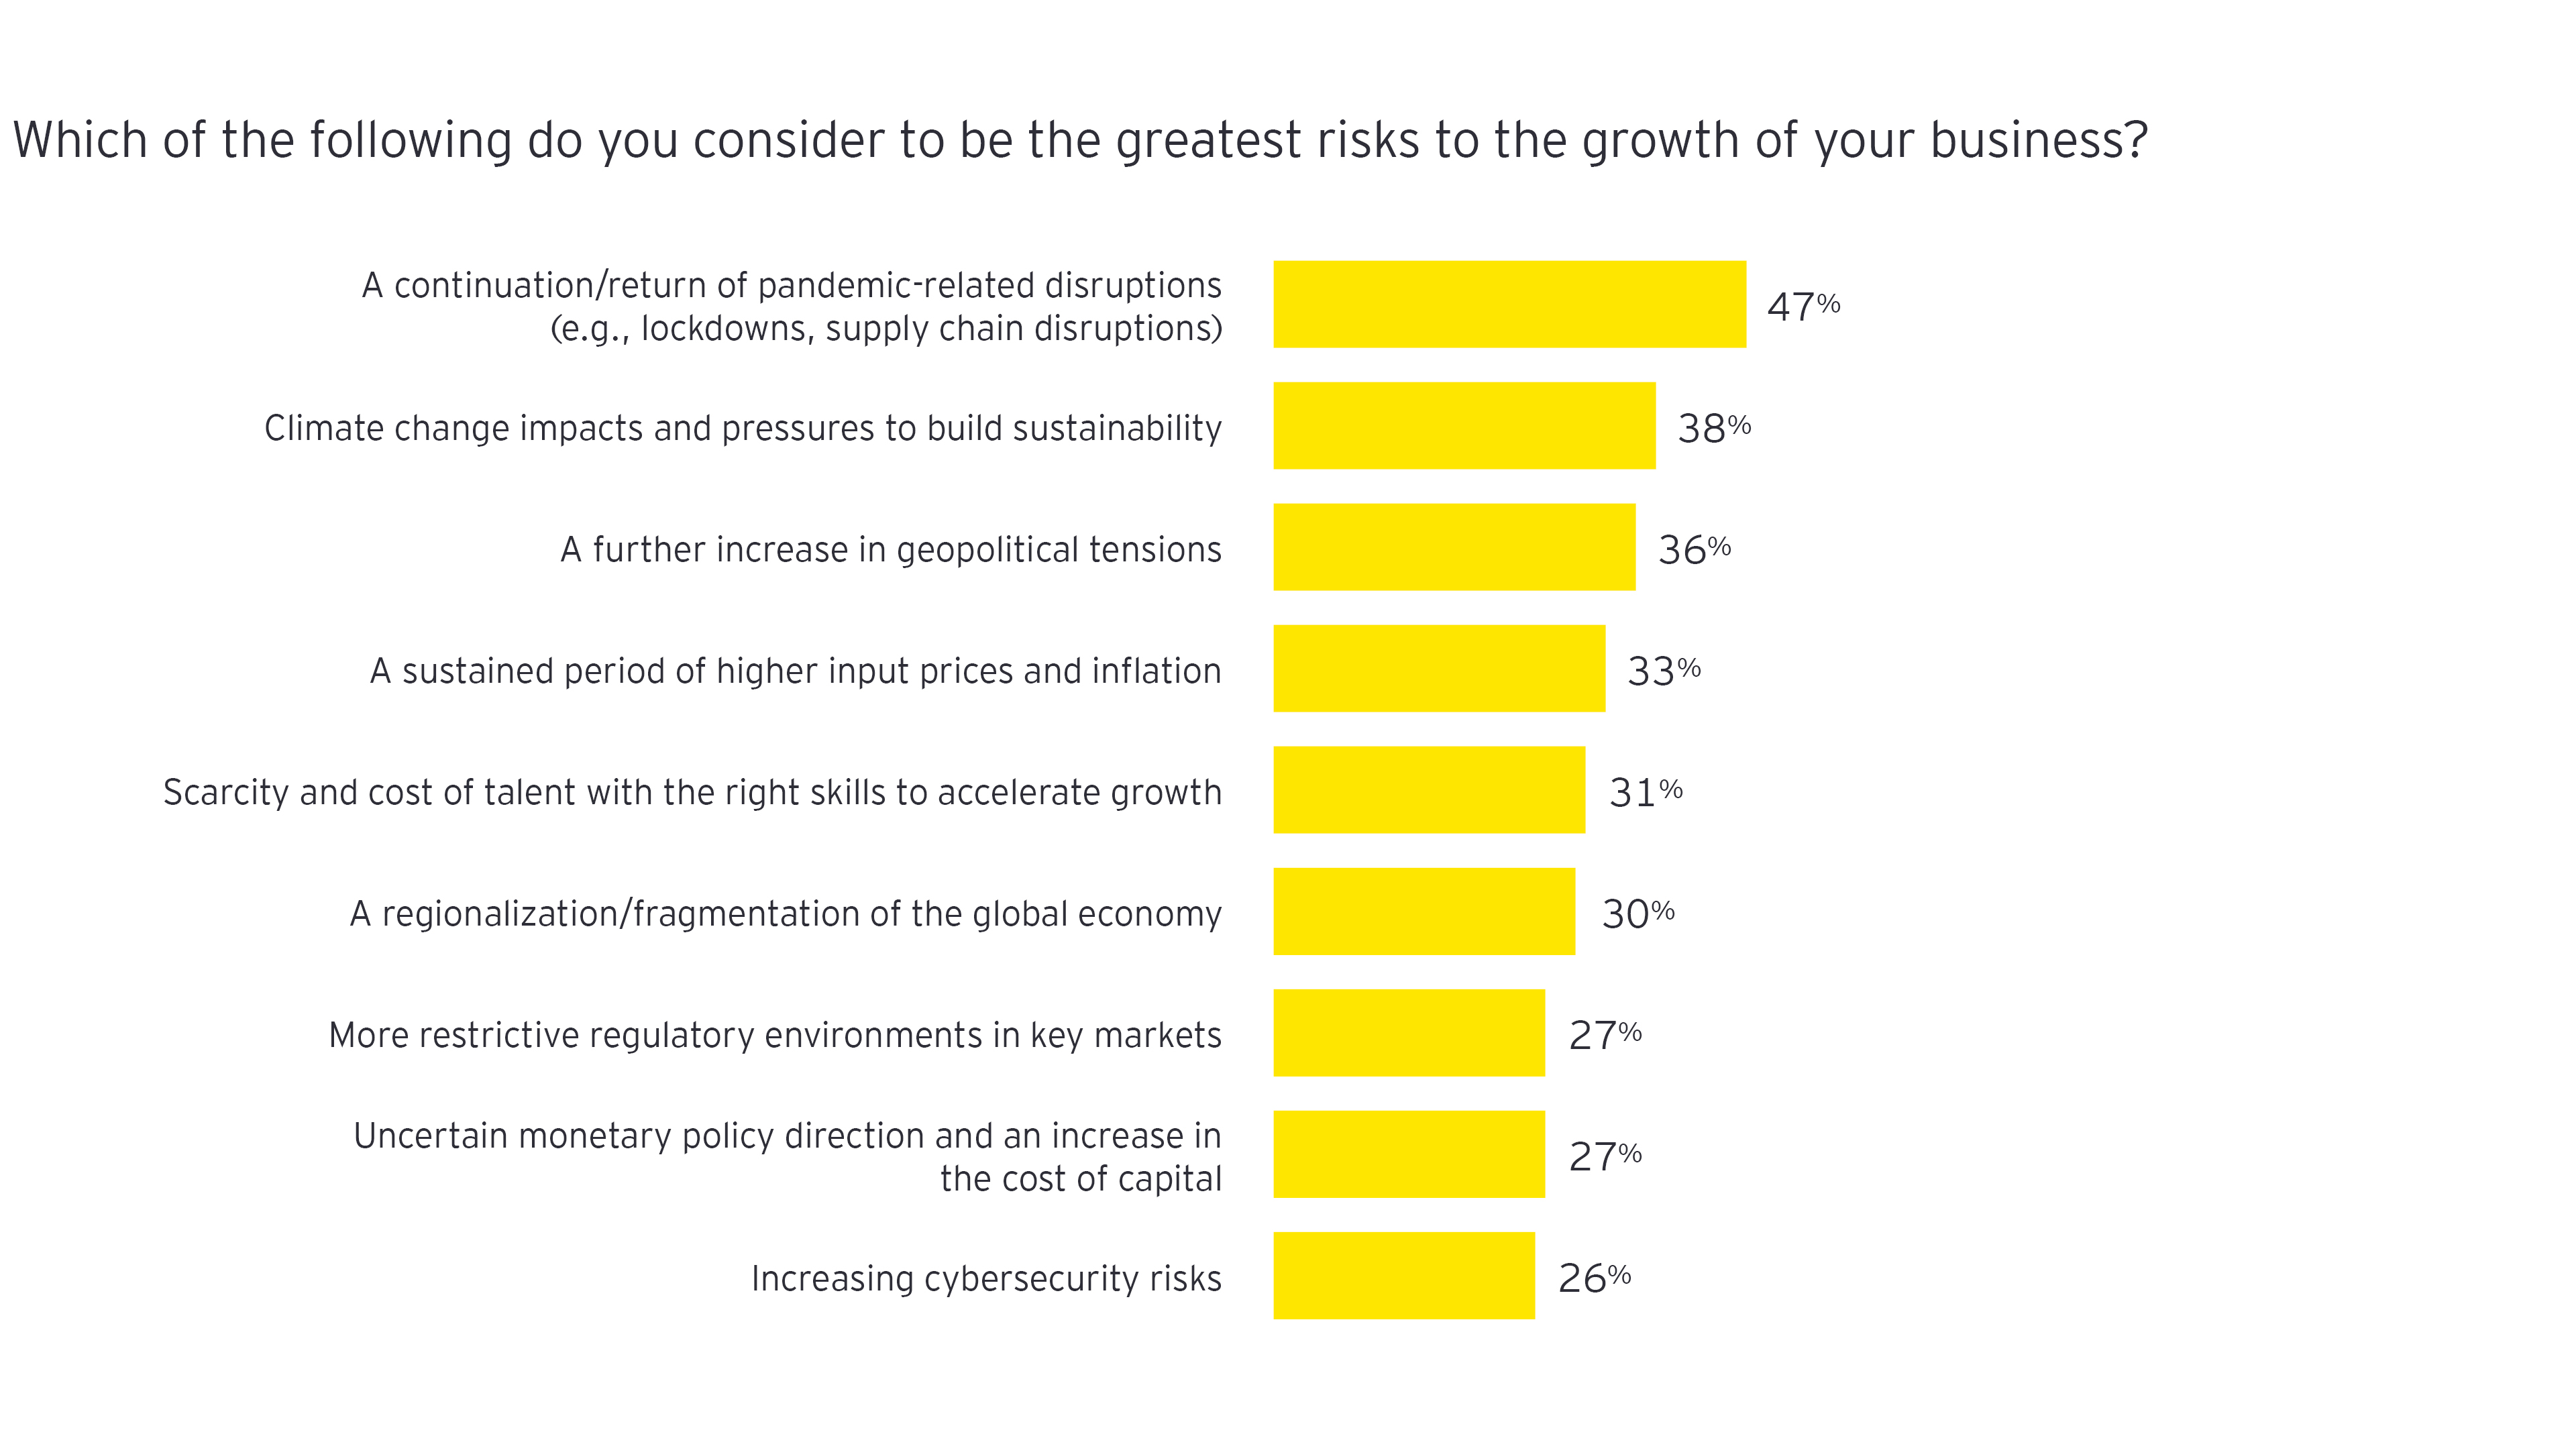 Which of the following do you consider to be the greatest risks to the growth of your business